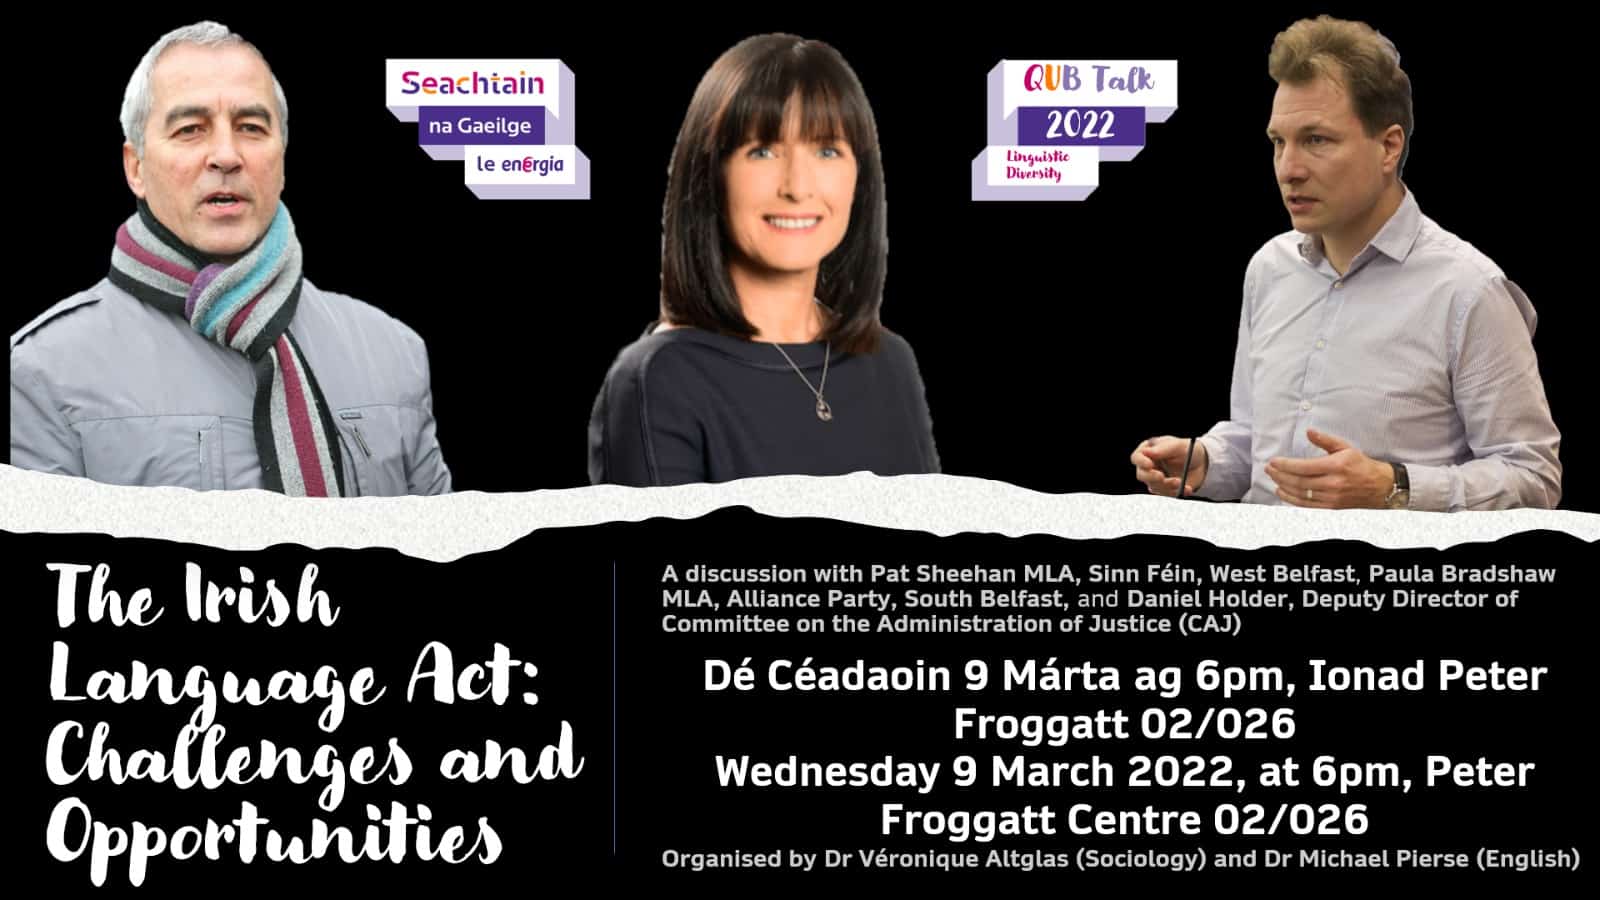 Irish Language Act: Challenges and Opportunities.